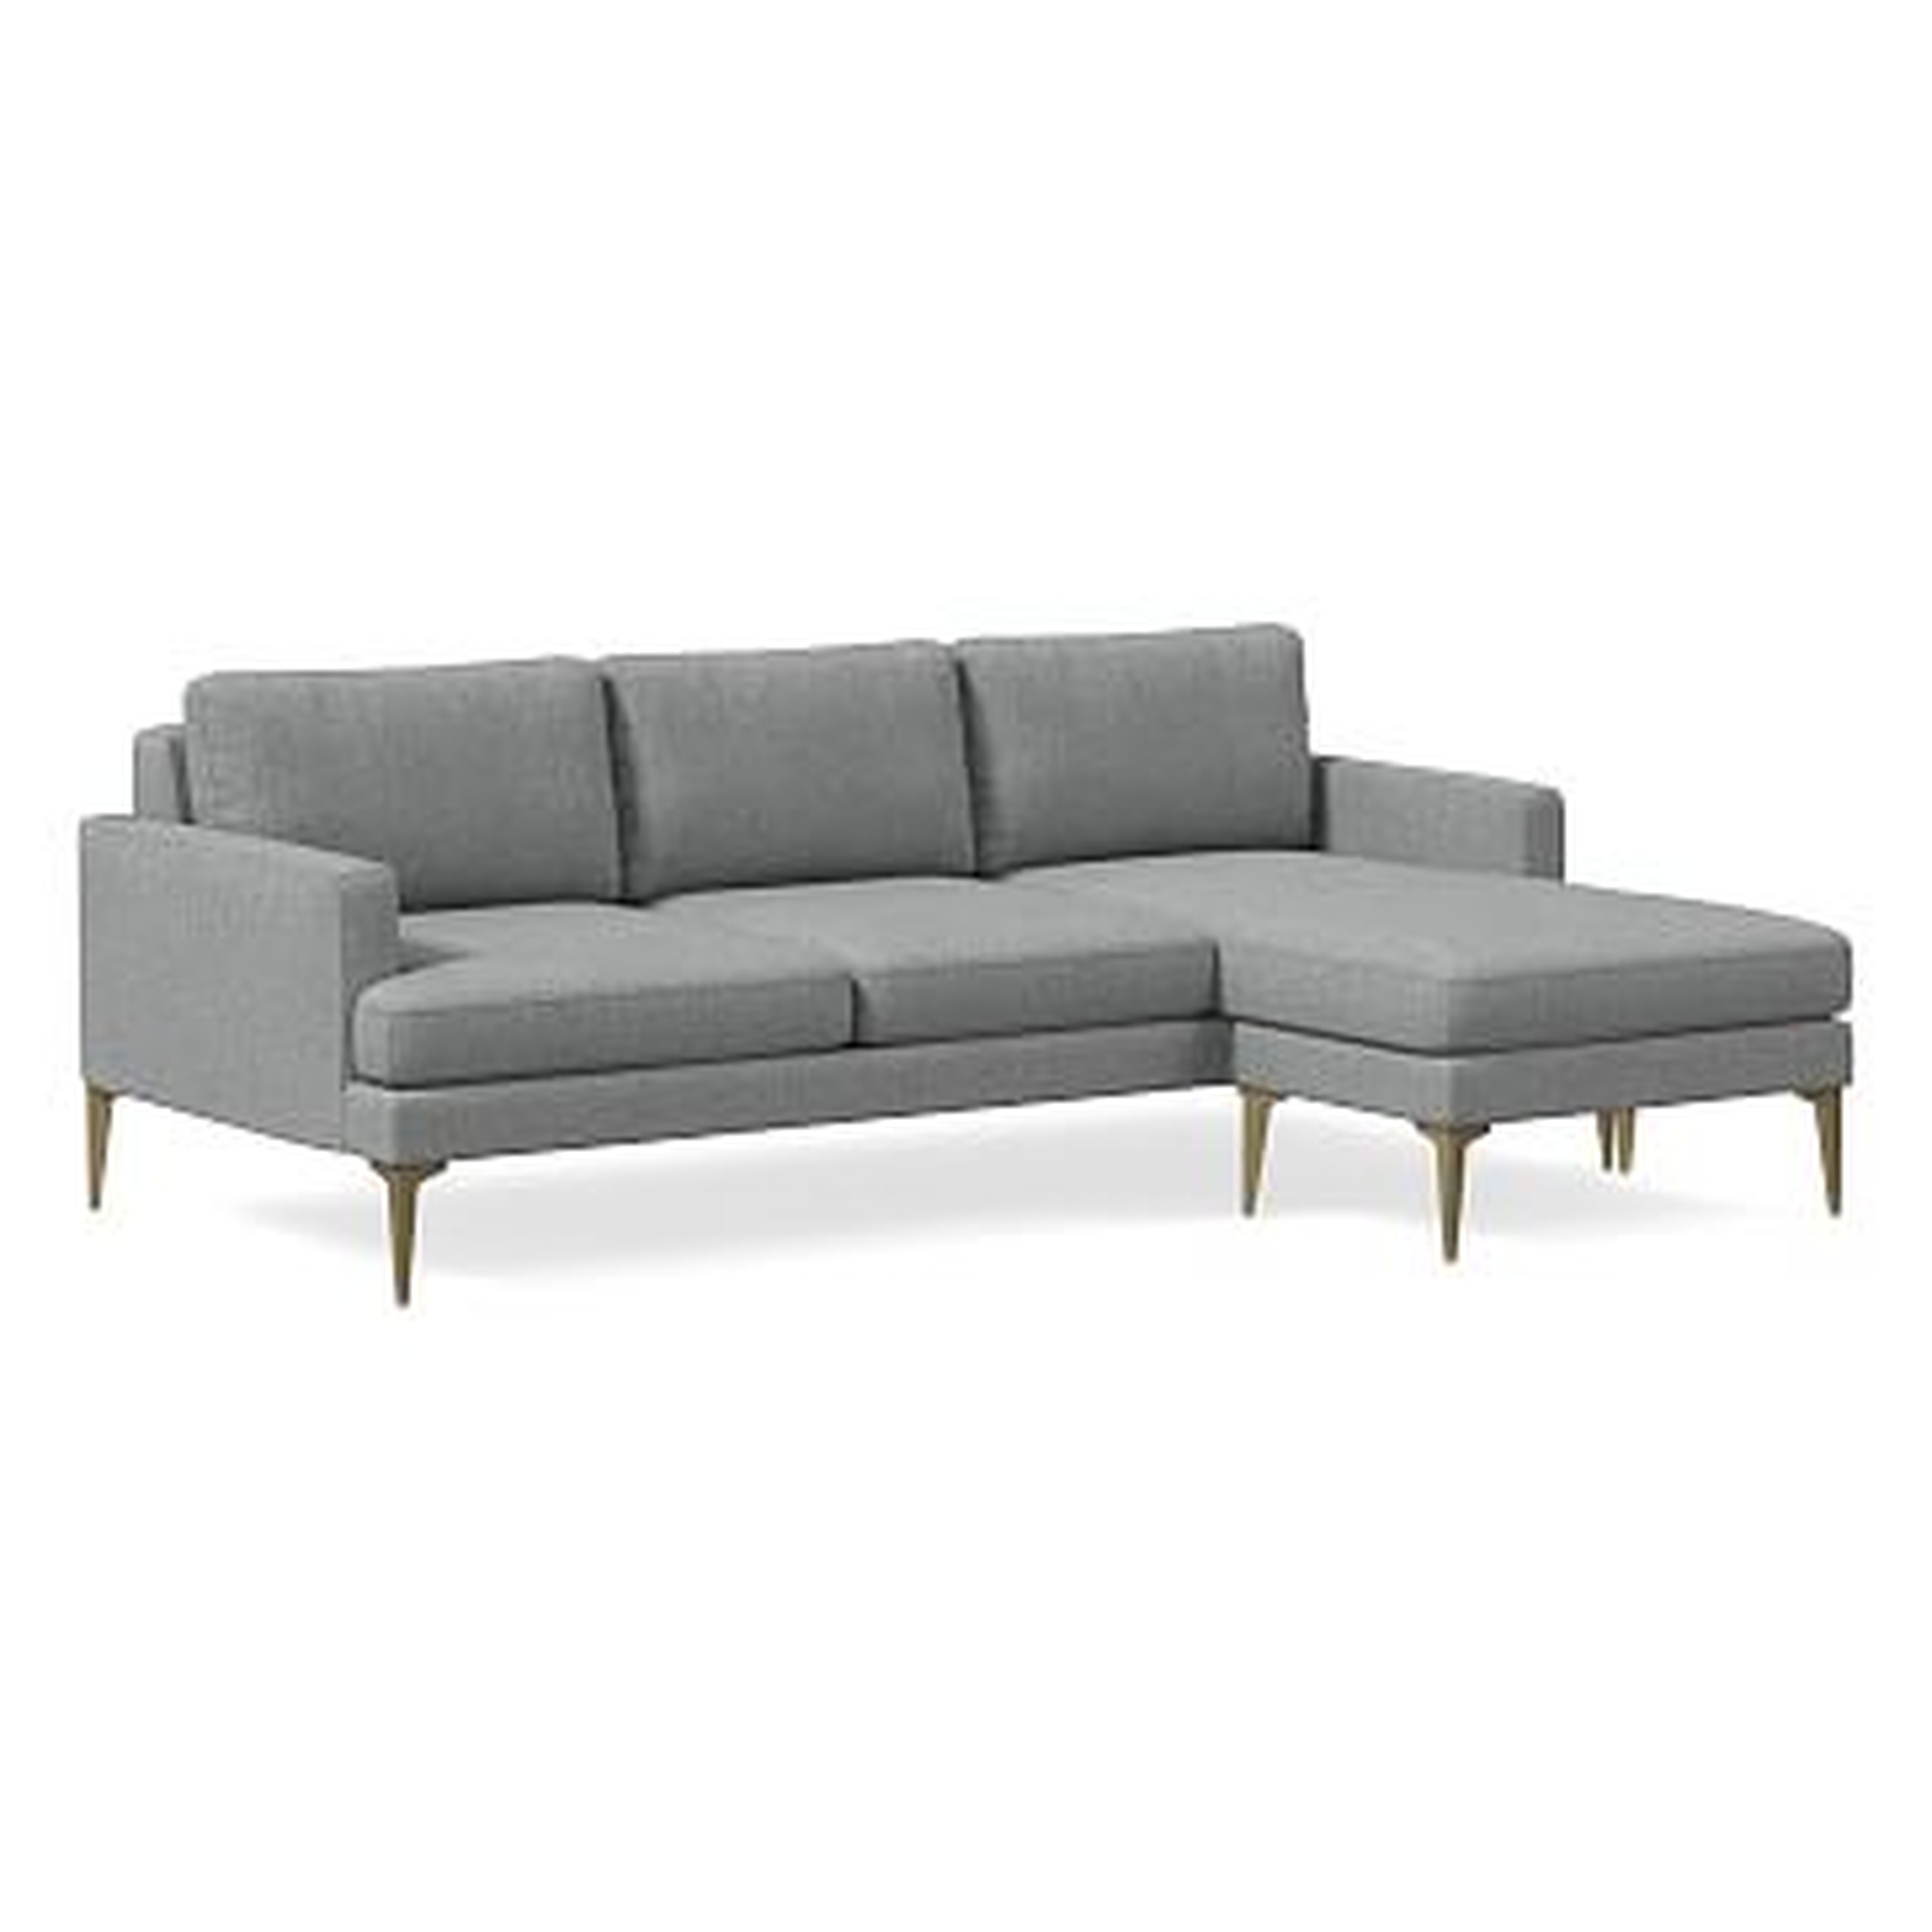 Andes Flip Sectional, Poly, Performance Coastal Linen, Anchor Gray, Blackened Brass - West Elm